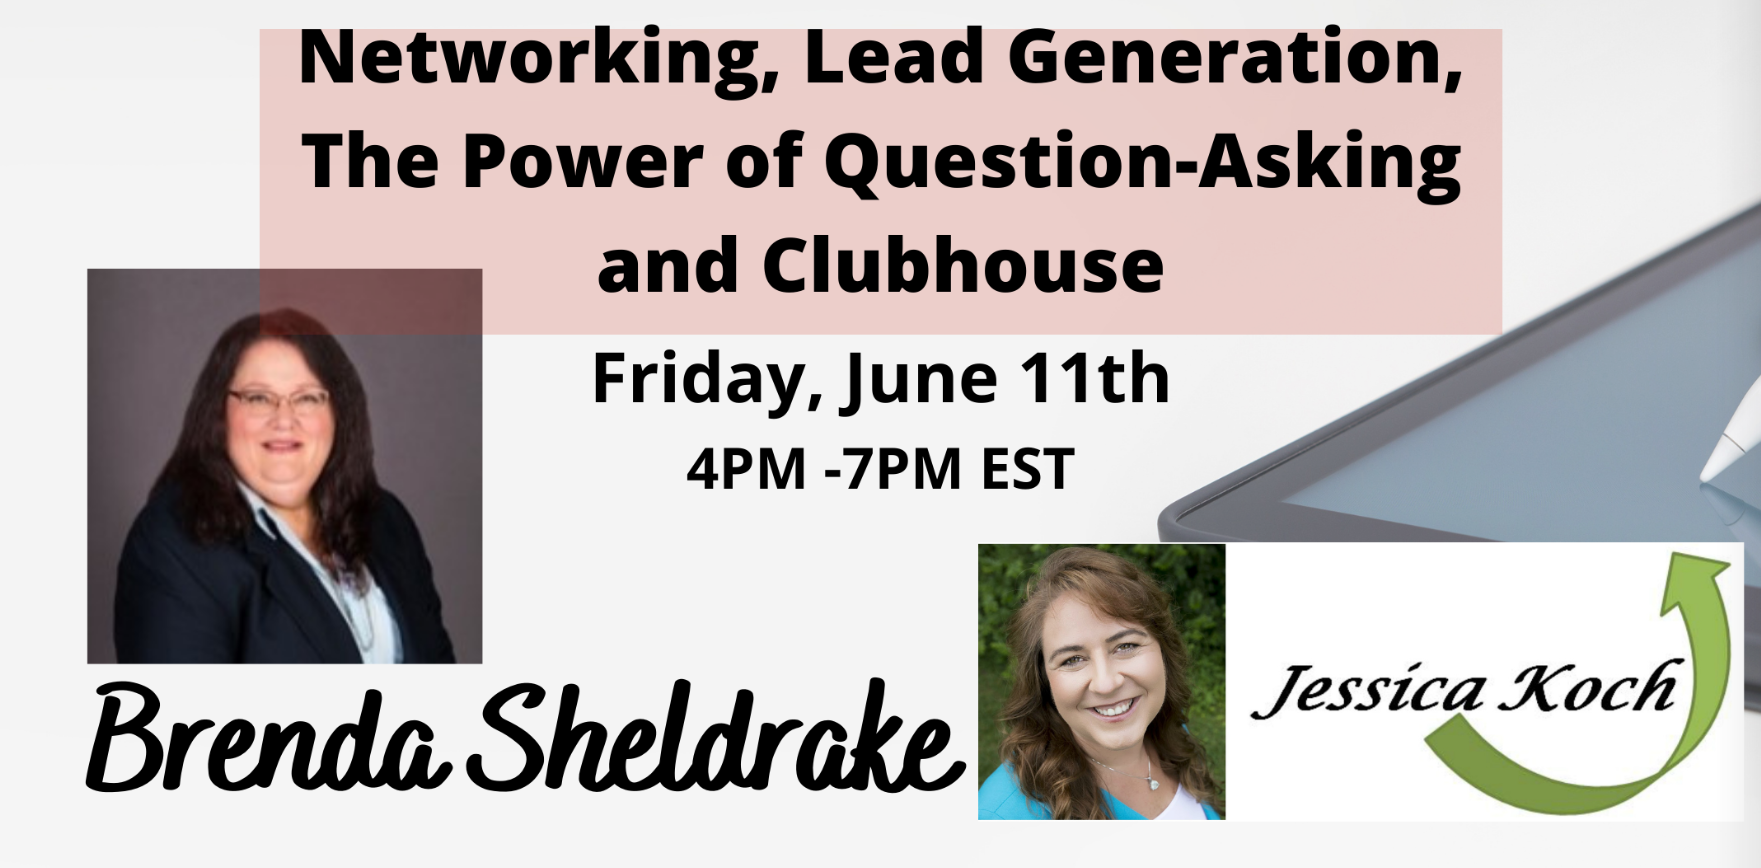 Networking, Lead Generation, The Power of Question-Asking and Clubhouse, Baltimore, Maryland, United States